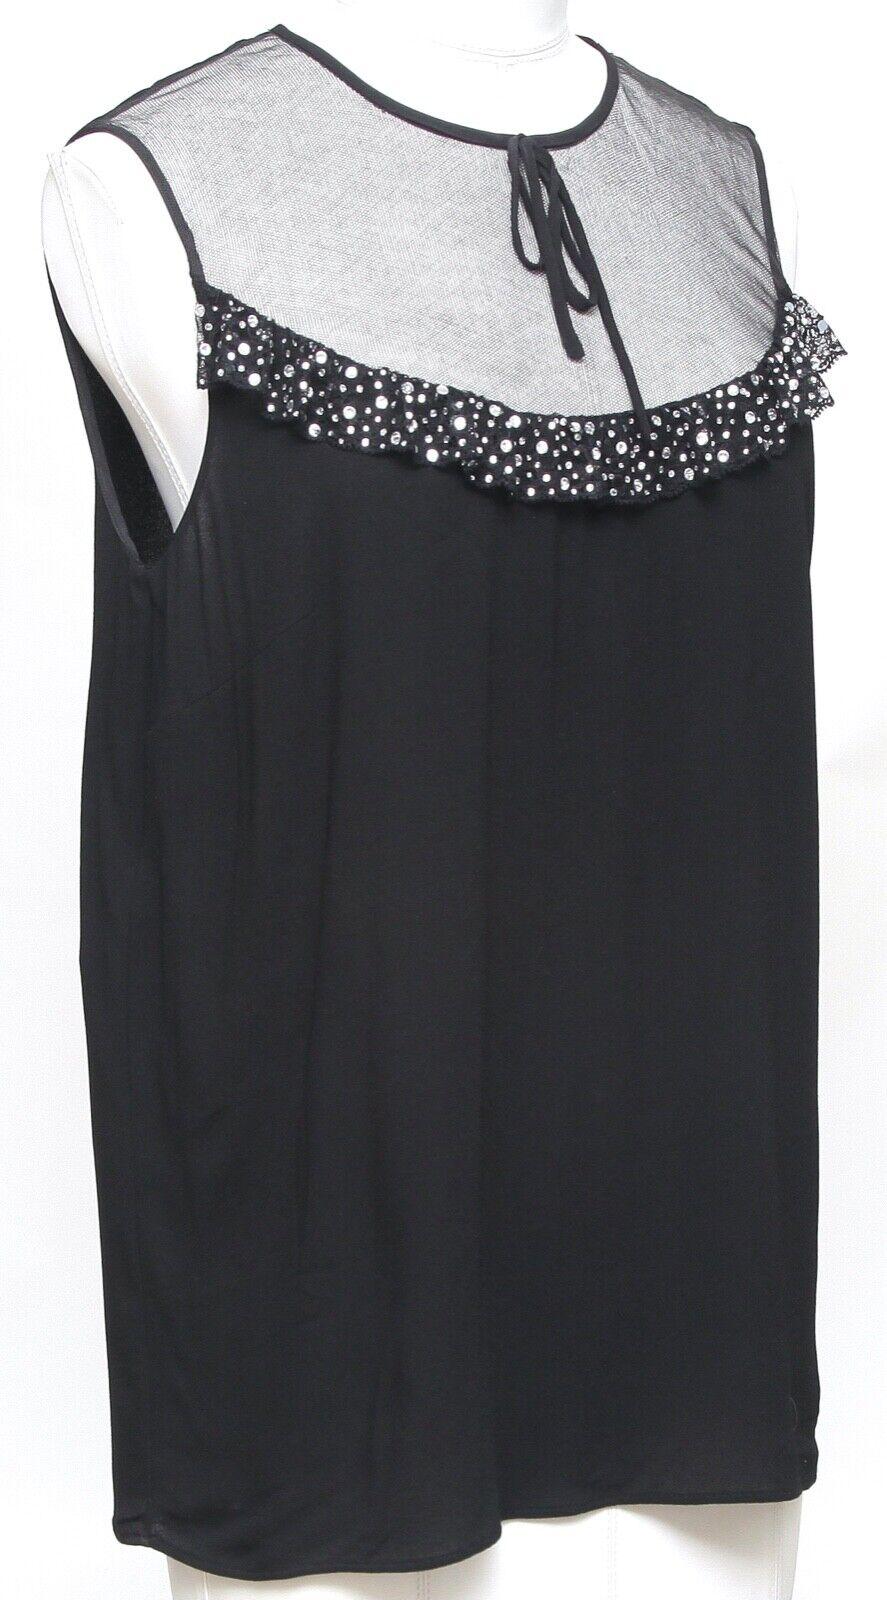 GUARANTEED AUTHENTIC MIU MIU BLACK SLEEVELESS BLOUSE

Design:
- Black sleeveless sleeveless viscose blend blouse.
- Front netting, sequin and tie.
- Slip-on with button closure.
- Unlined. 

Size: 42

Material: 98% Viscose, 2% Elastane

Measurements